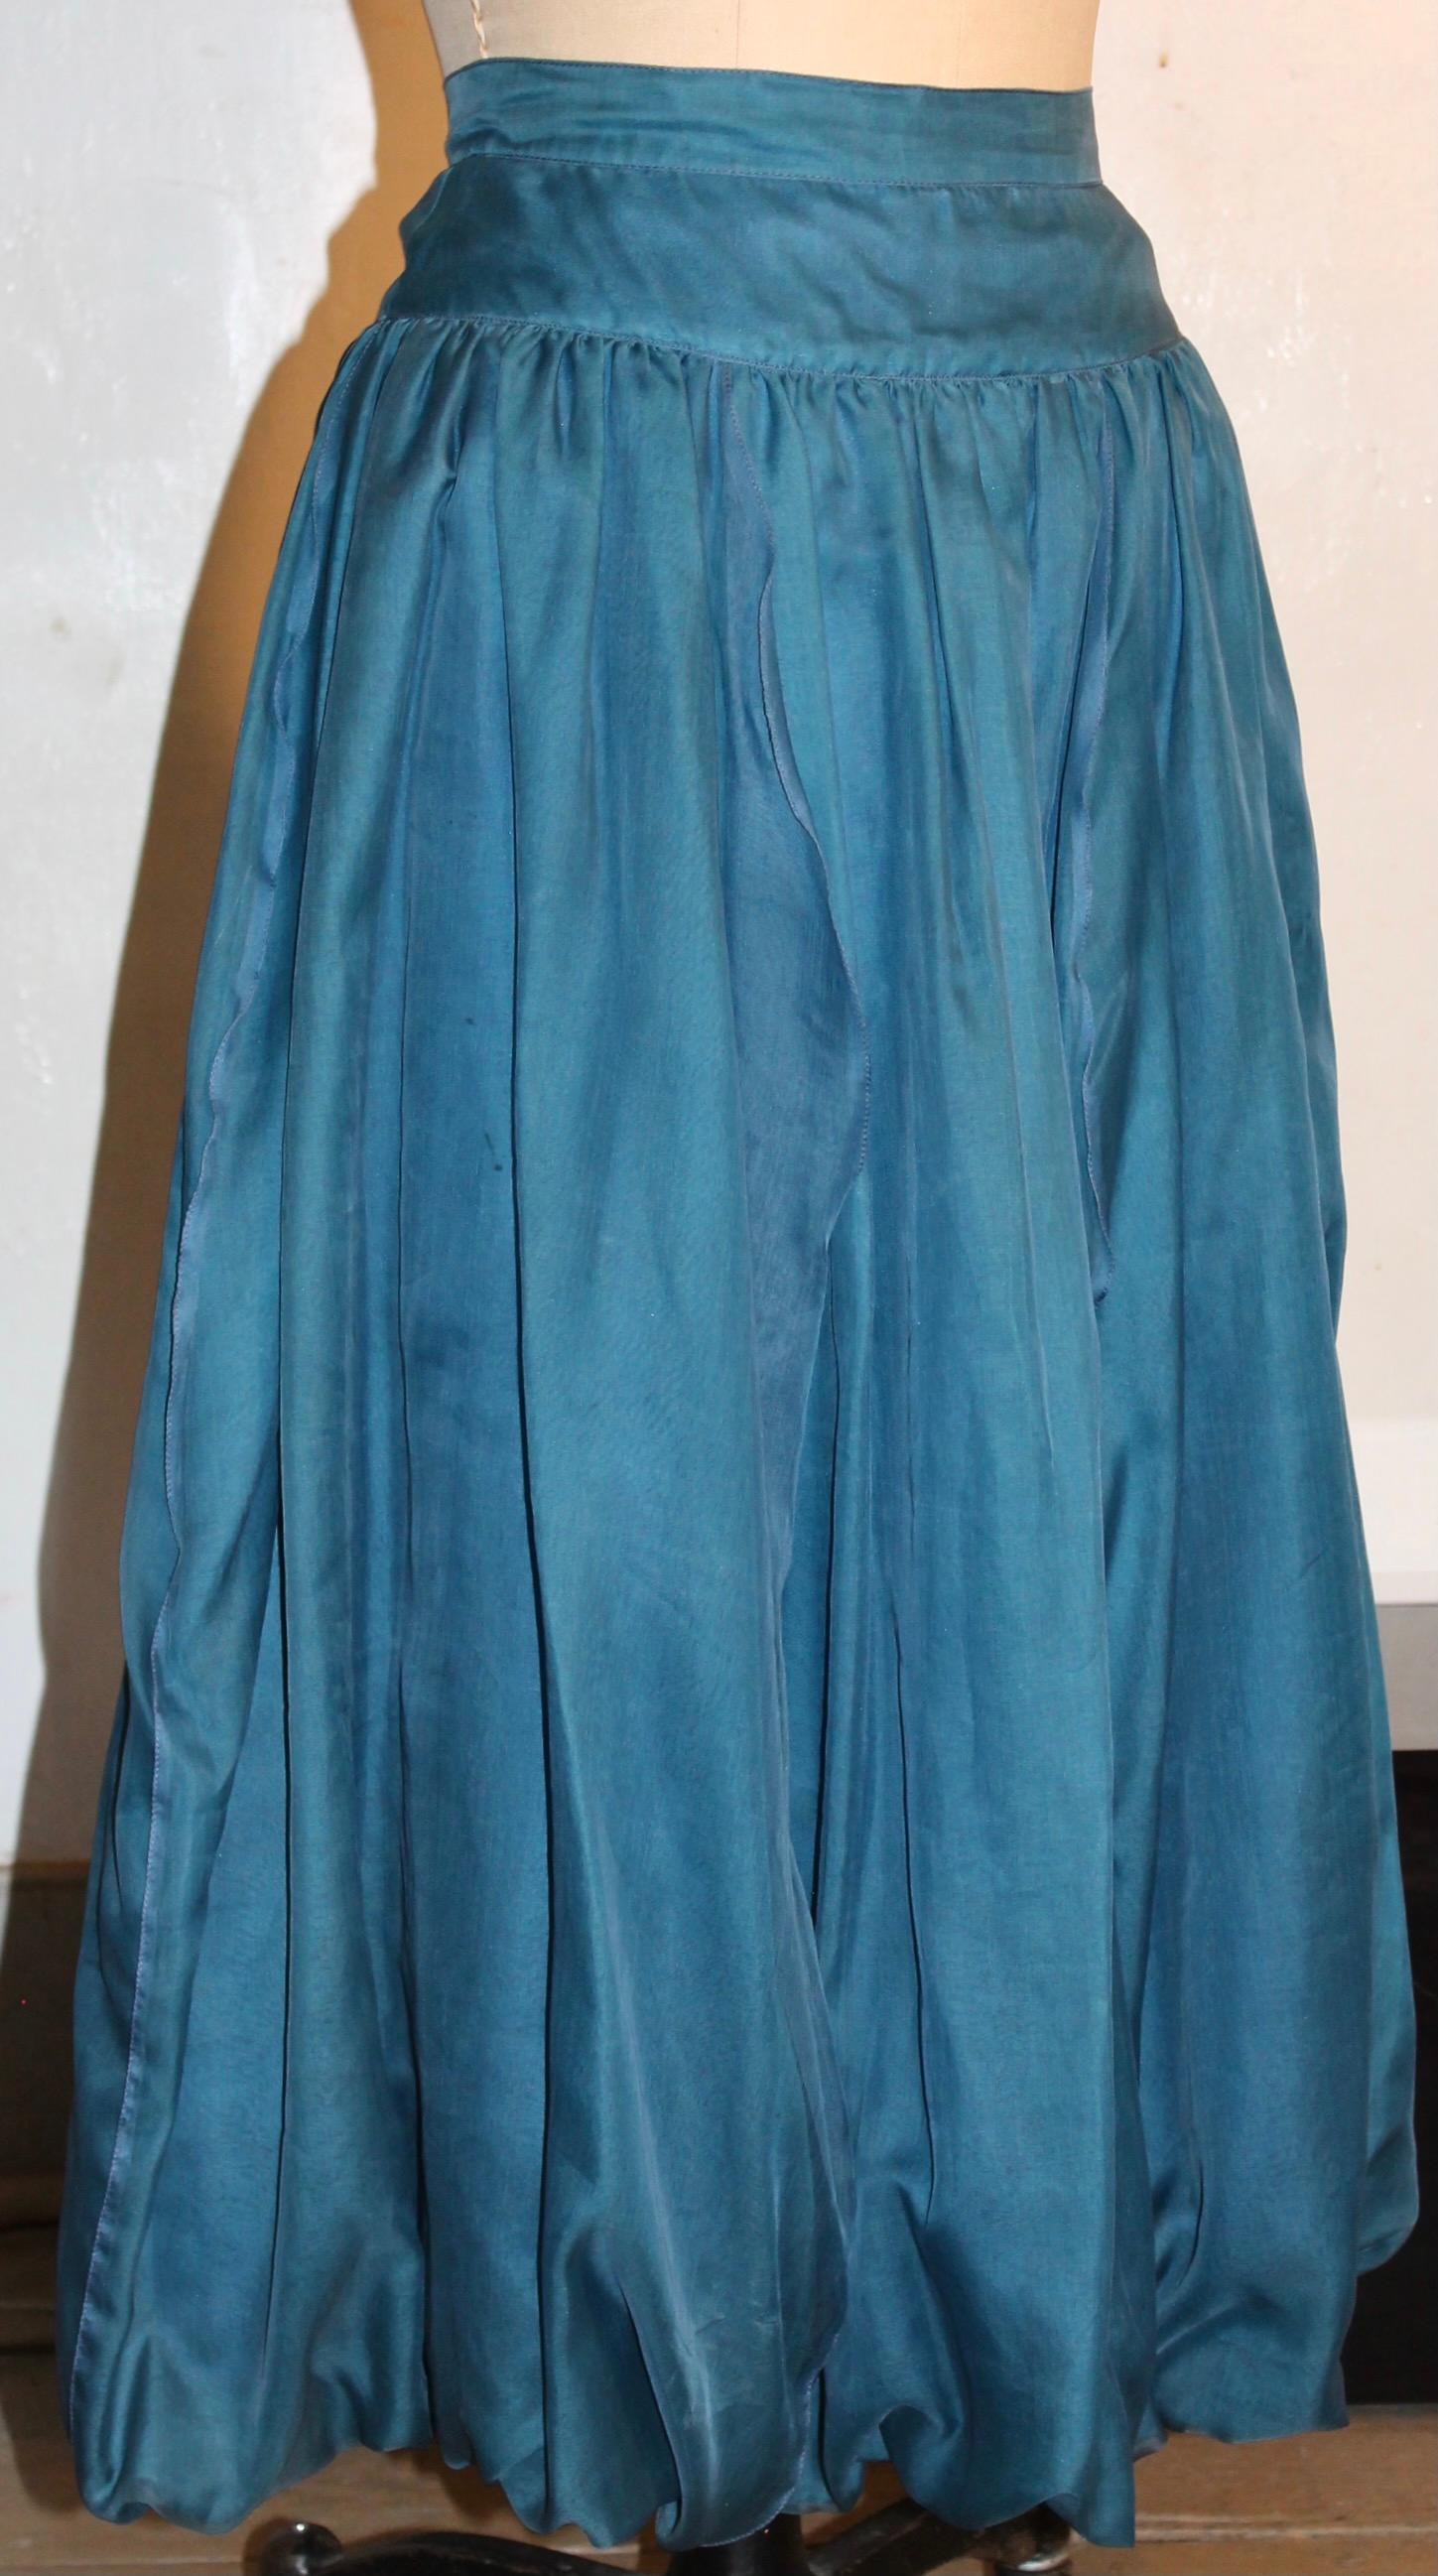 Skirt is fully lined in blue silk, and has a slightly billowy effect at the hem.